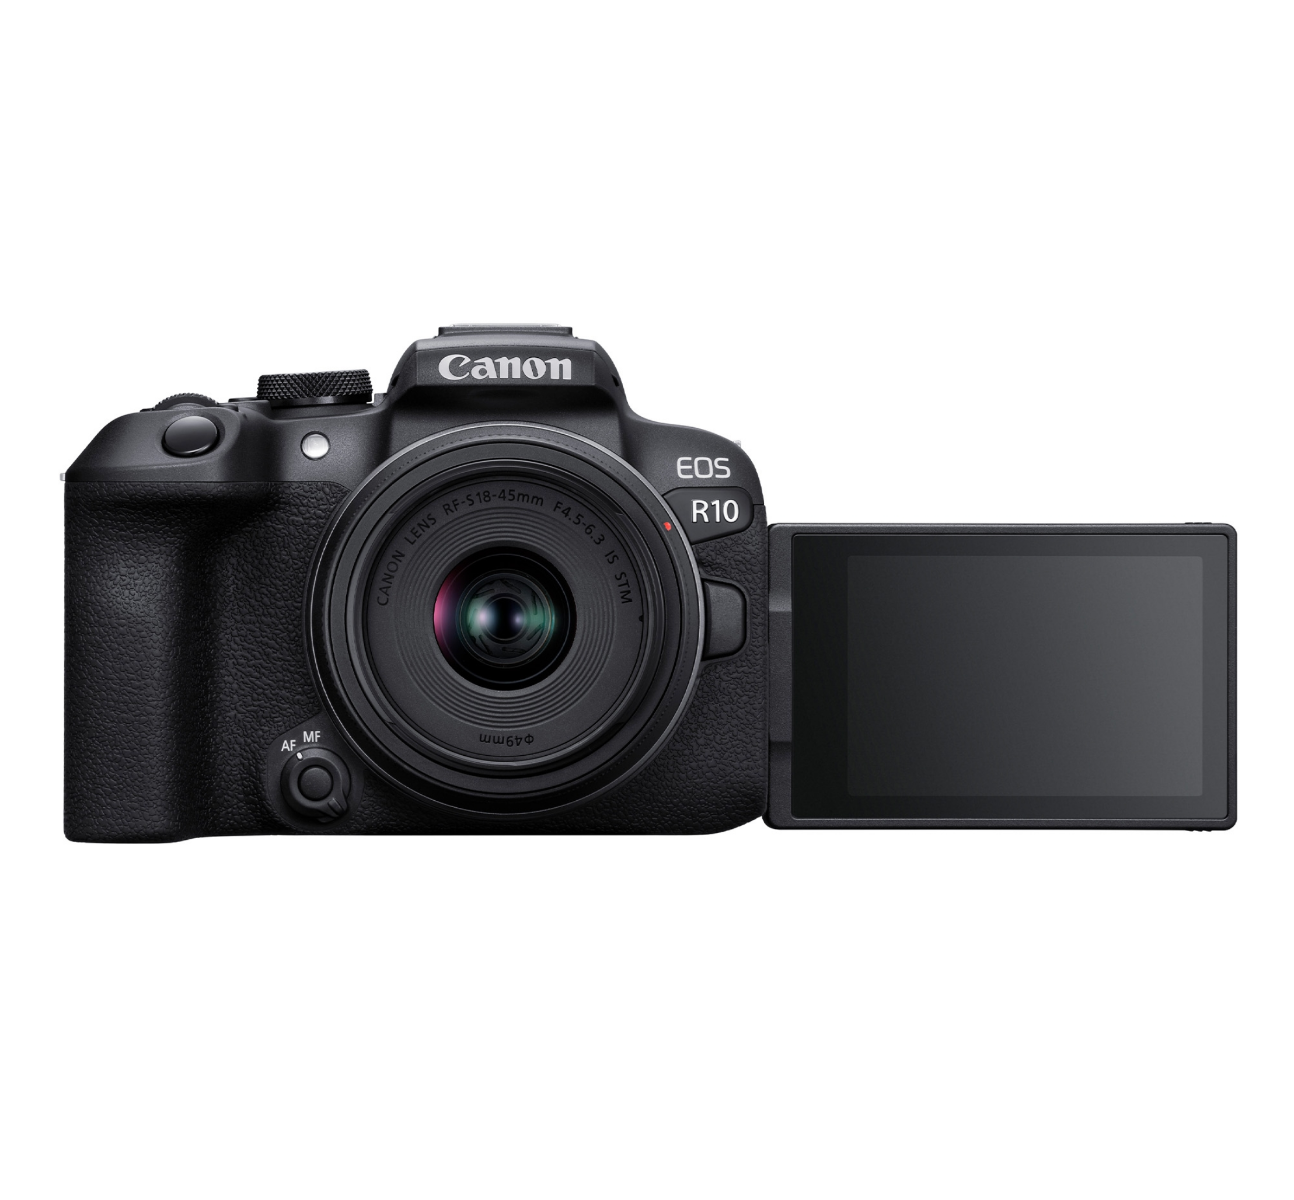 Canon EOS R10 Mirrorless Camera + RF-S 18-45mm lens Kit - Product photo 2 - Front view of the camera with the screen extended to it's full position